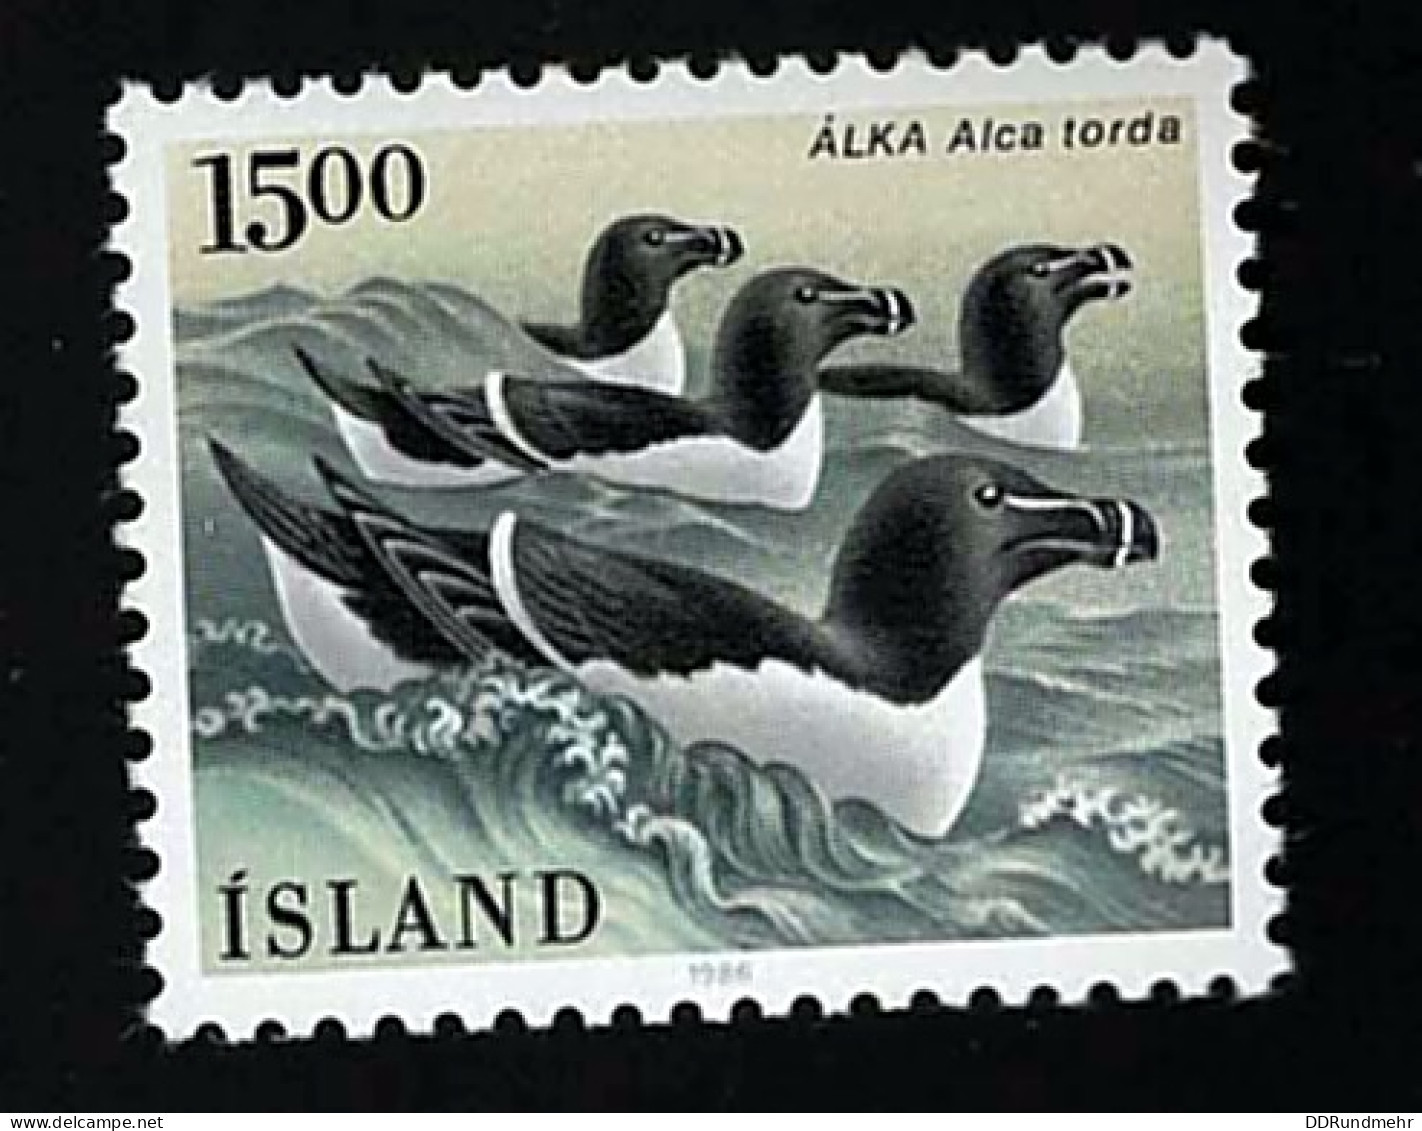 1986 Razorbill Michel IS 647 Stamp Number IS 621 Yvert Et Tellier IS 600 Stanley Gibbons IS 676 AFA IS 646 - Unused Stamps